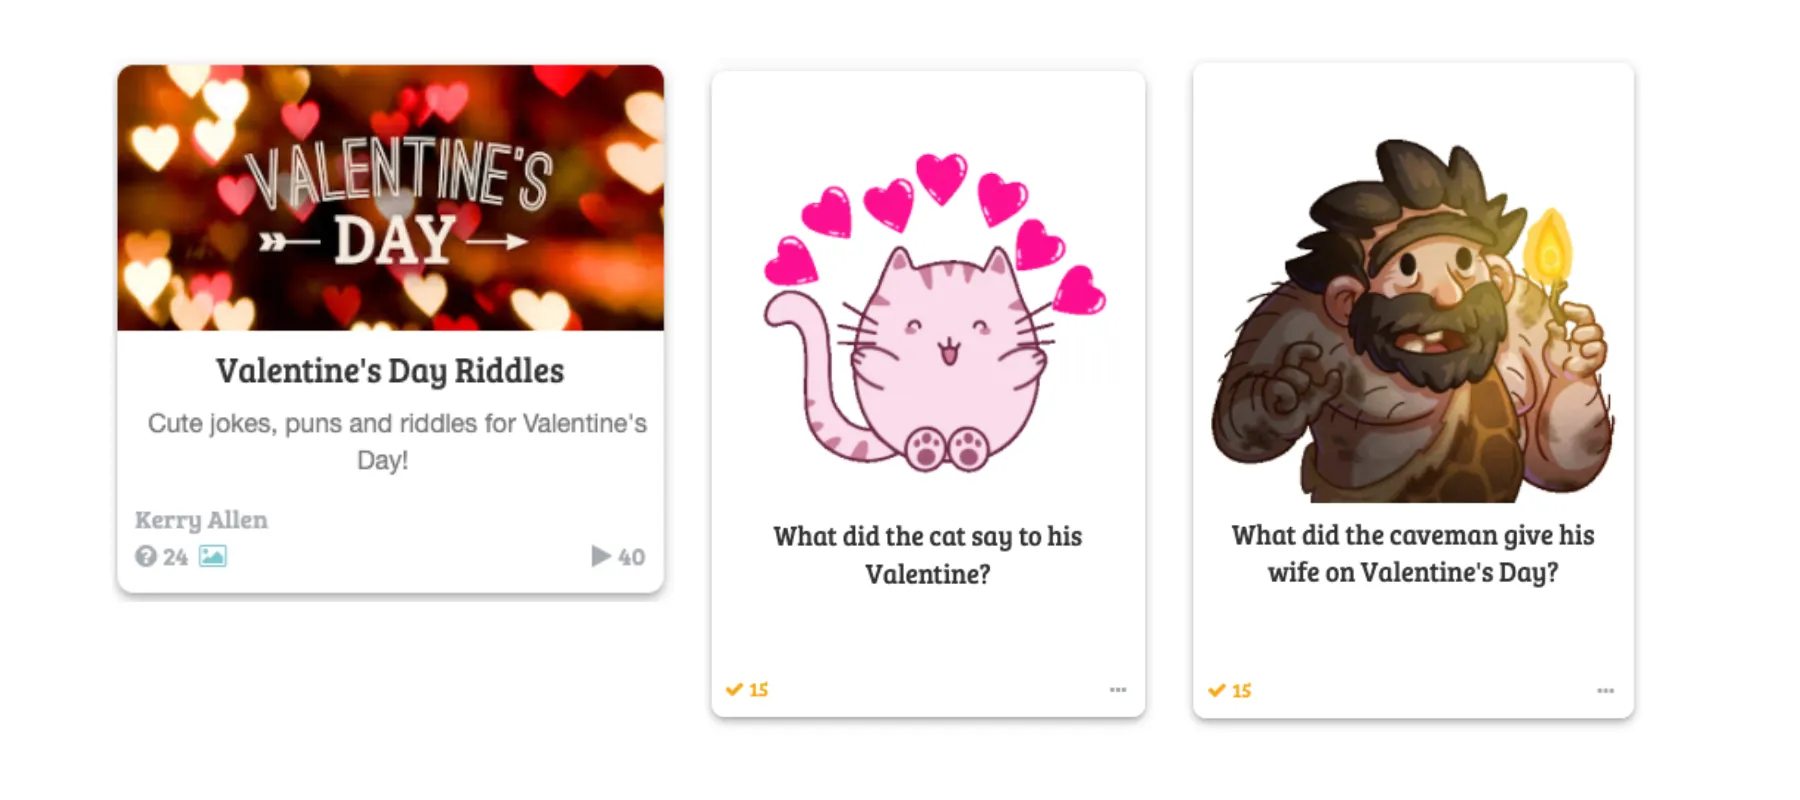 Valentine’s Day Riddles Game on Baamboozle